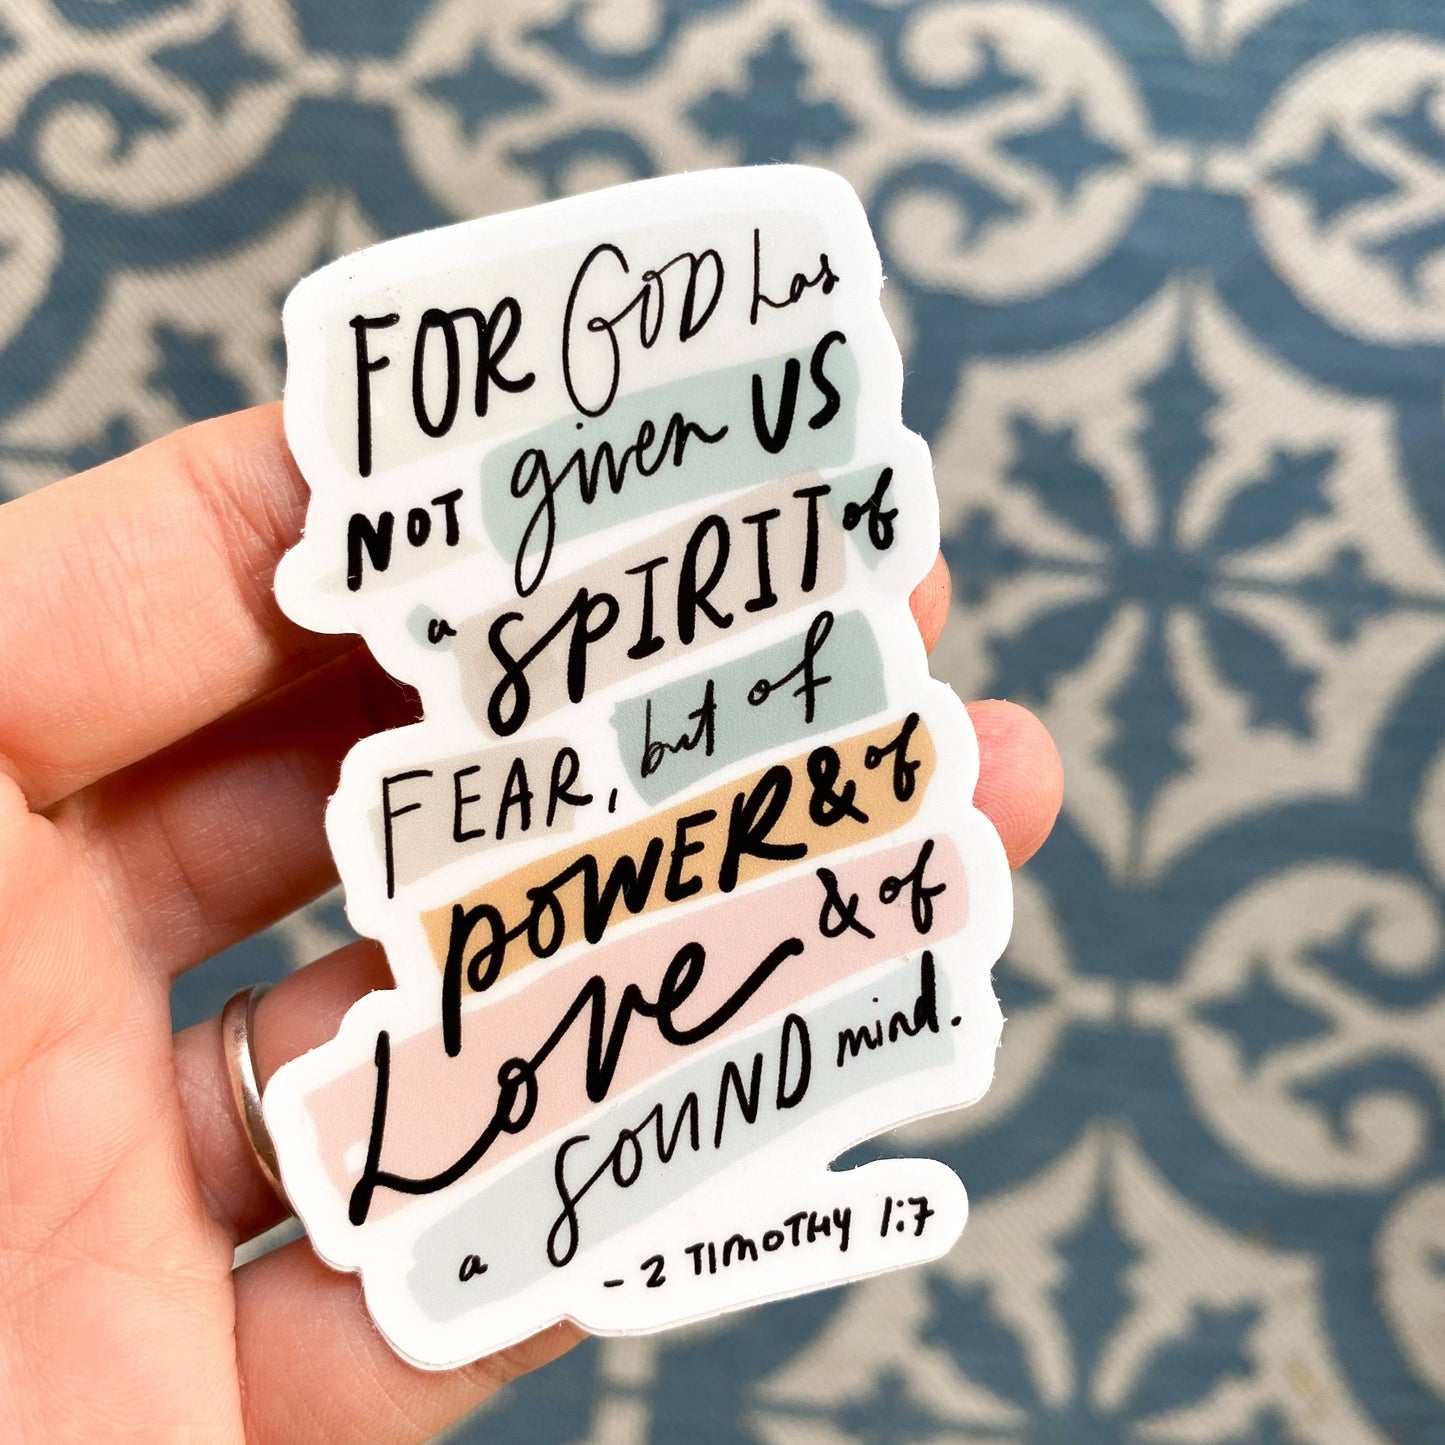 2 Timothy 1:7 Sticker *FREE SHIPPING with any order over $10